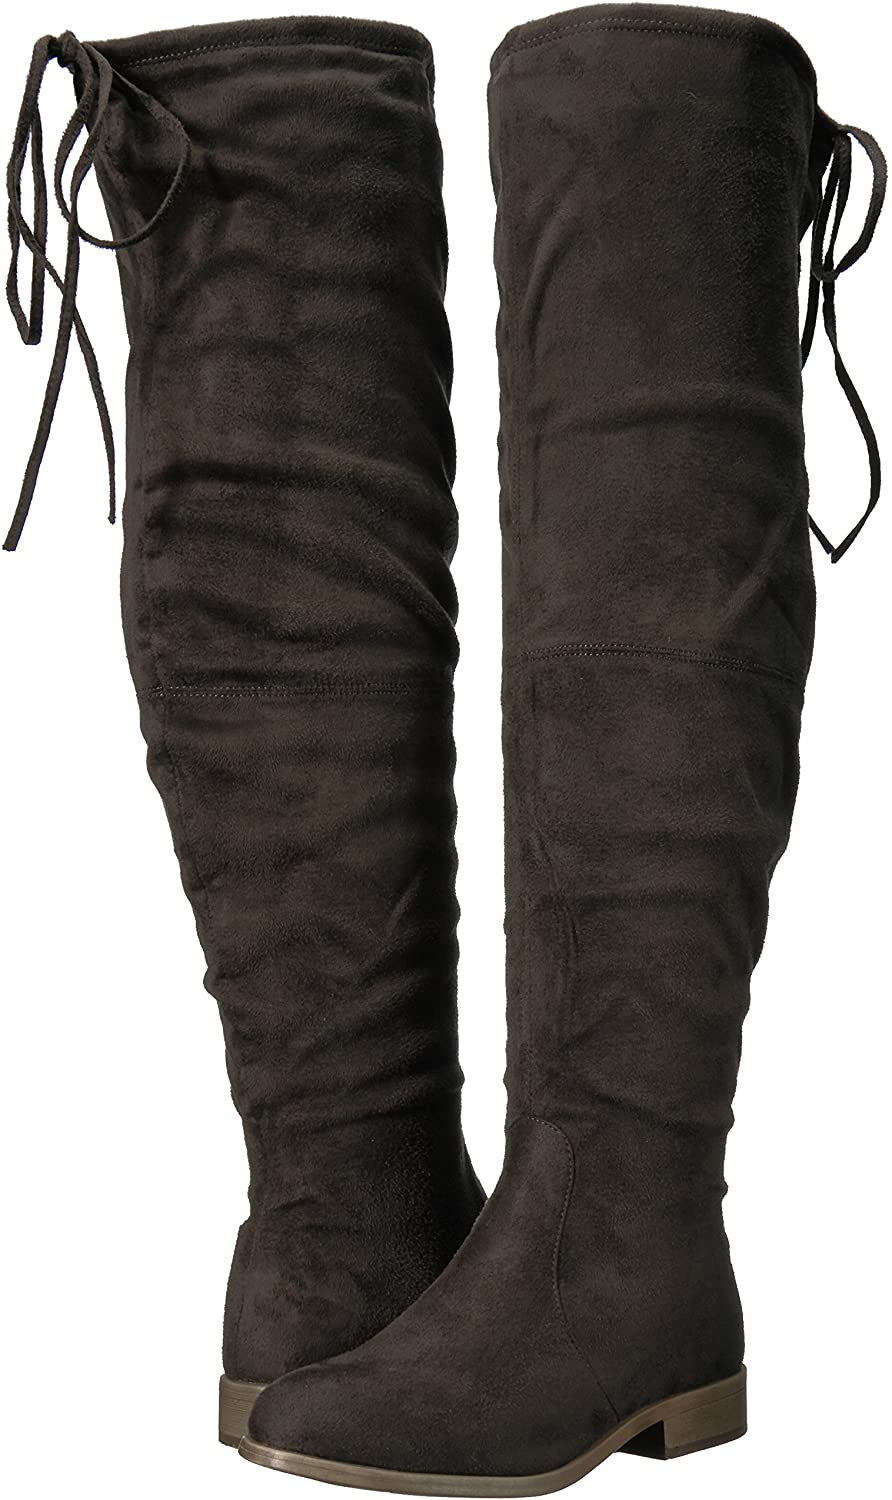 Brinley Co Women's Spur Over The Knee Boot 